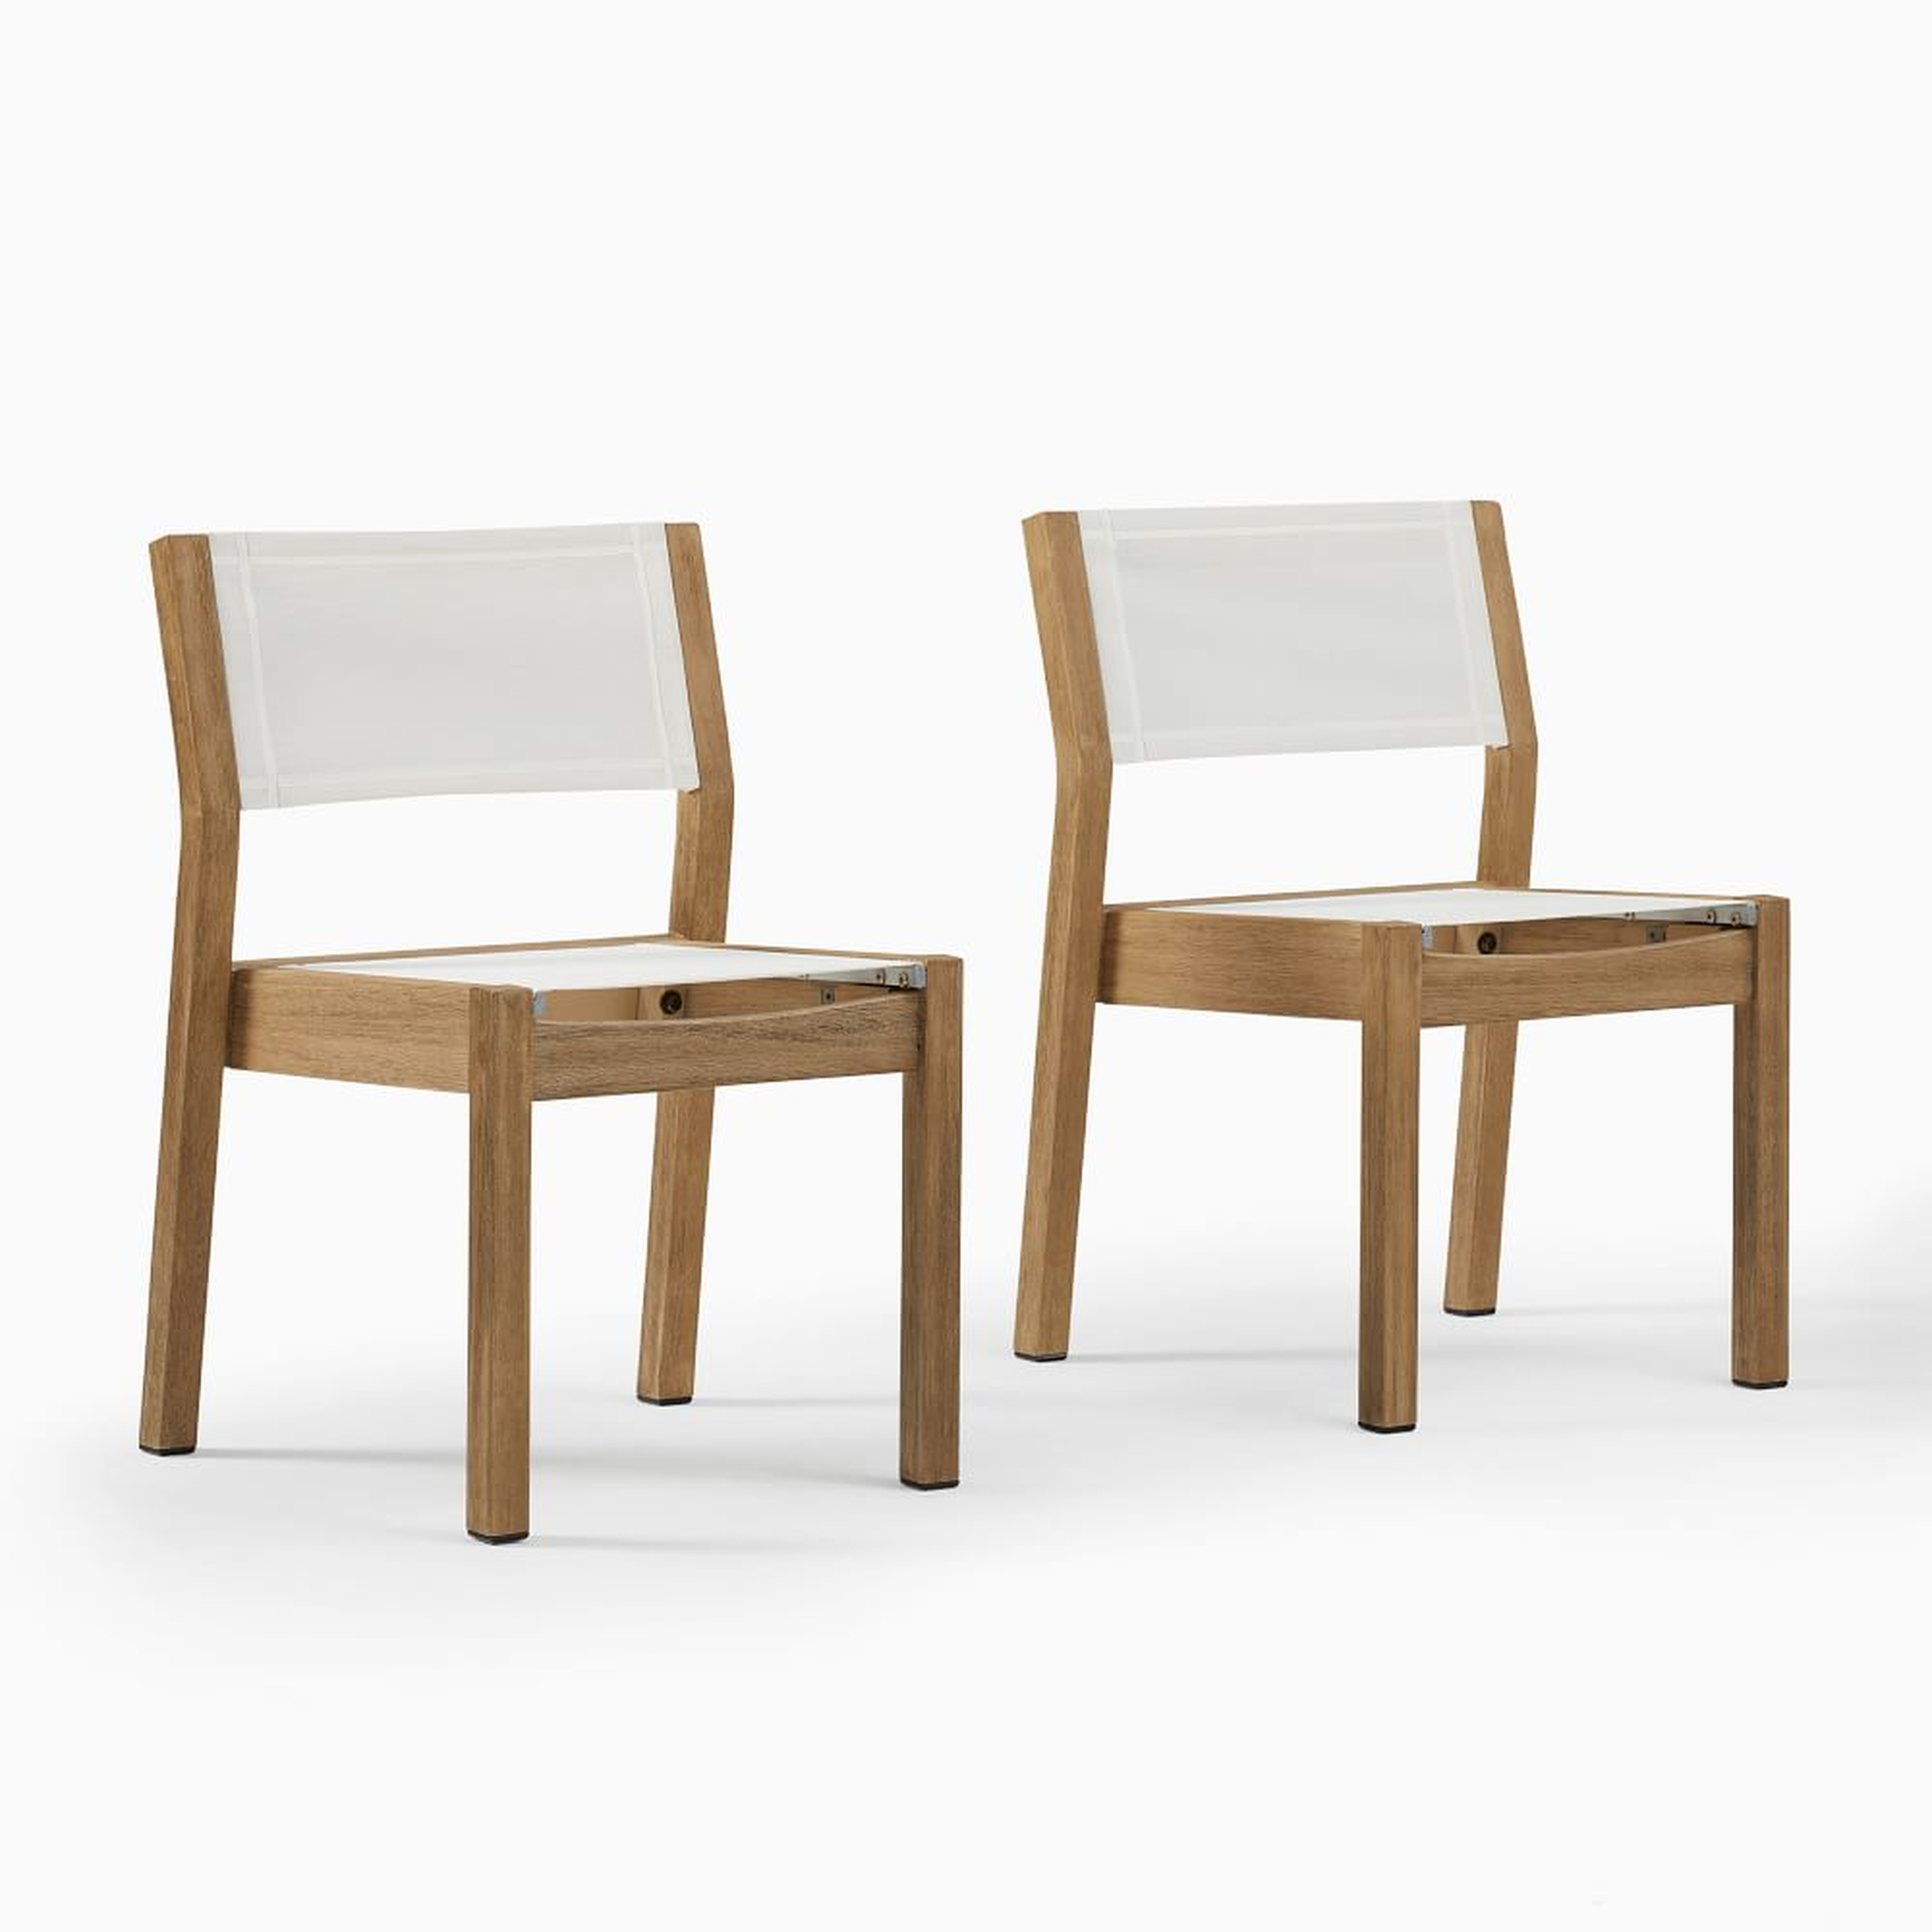 Portside Dining Chair, S/2 Stacking Chair, Reef - West Elm